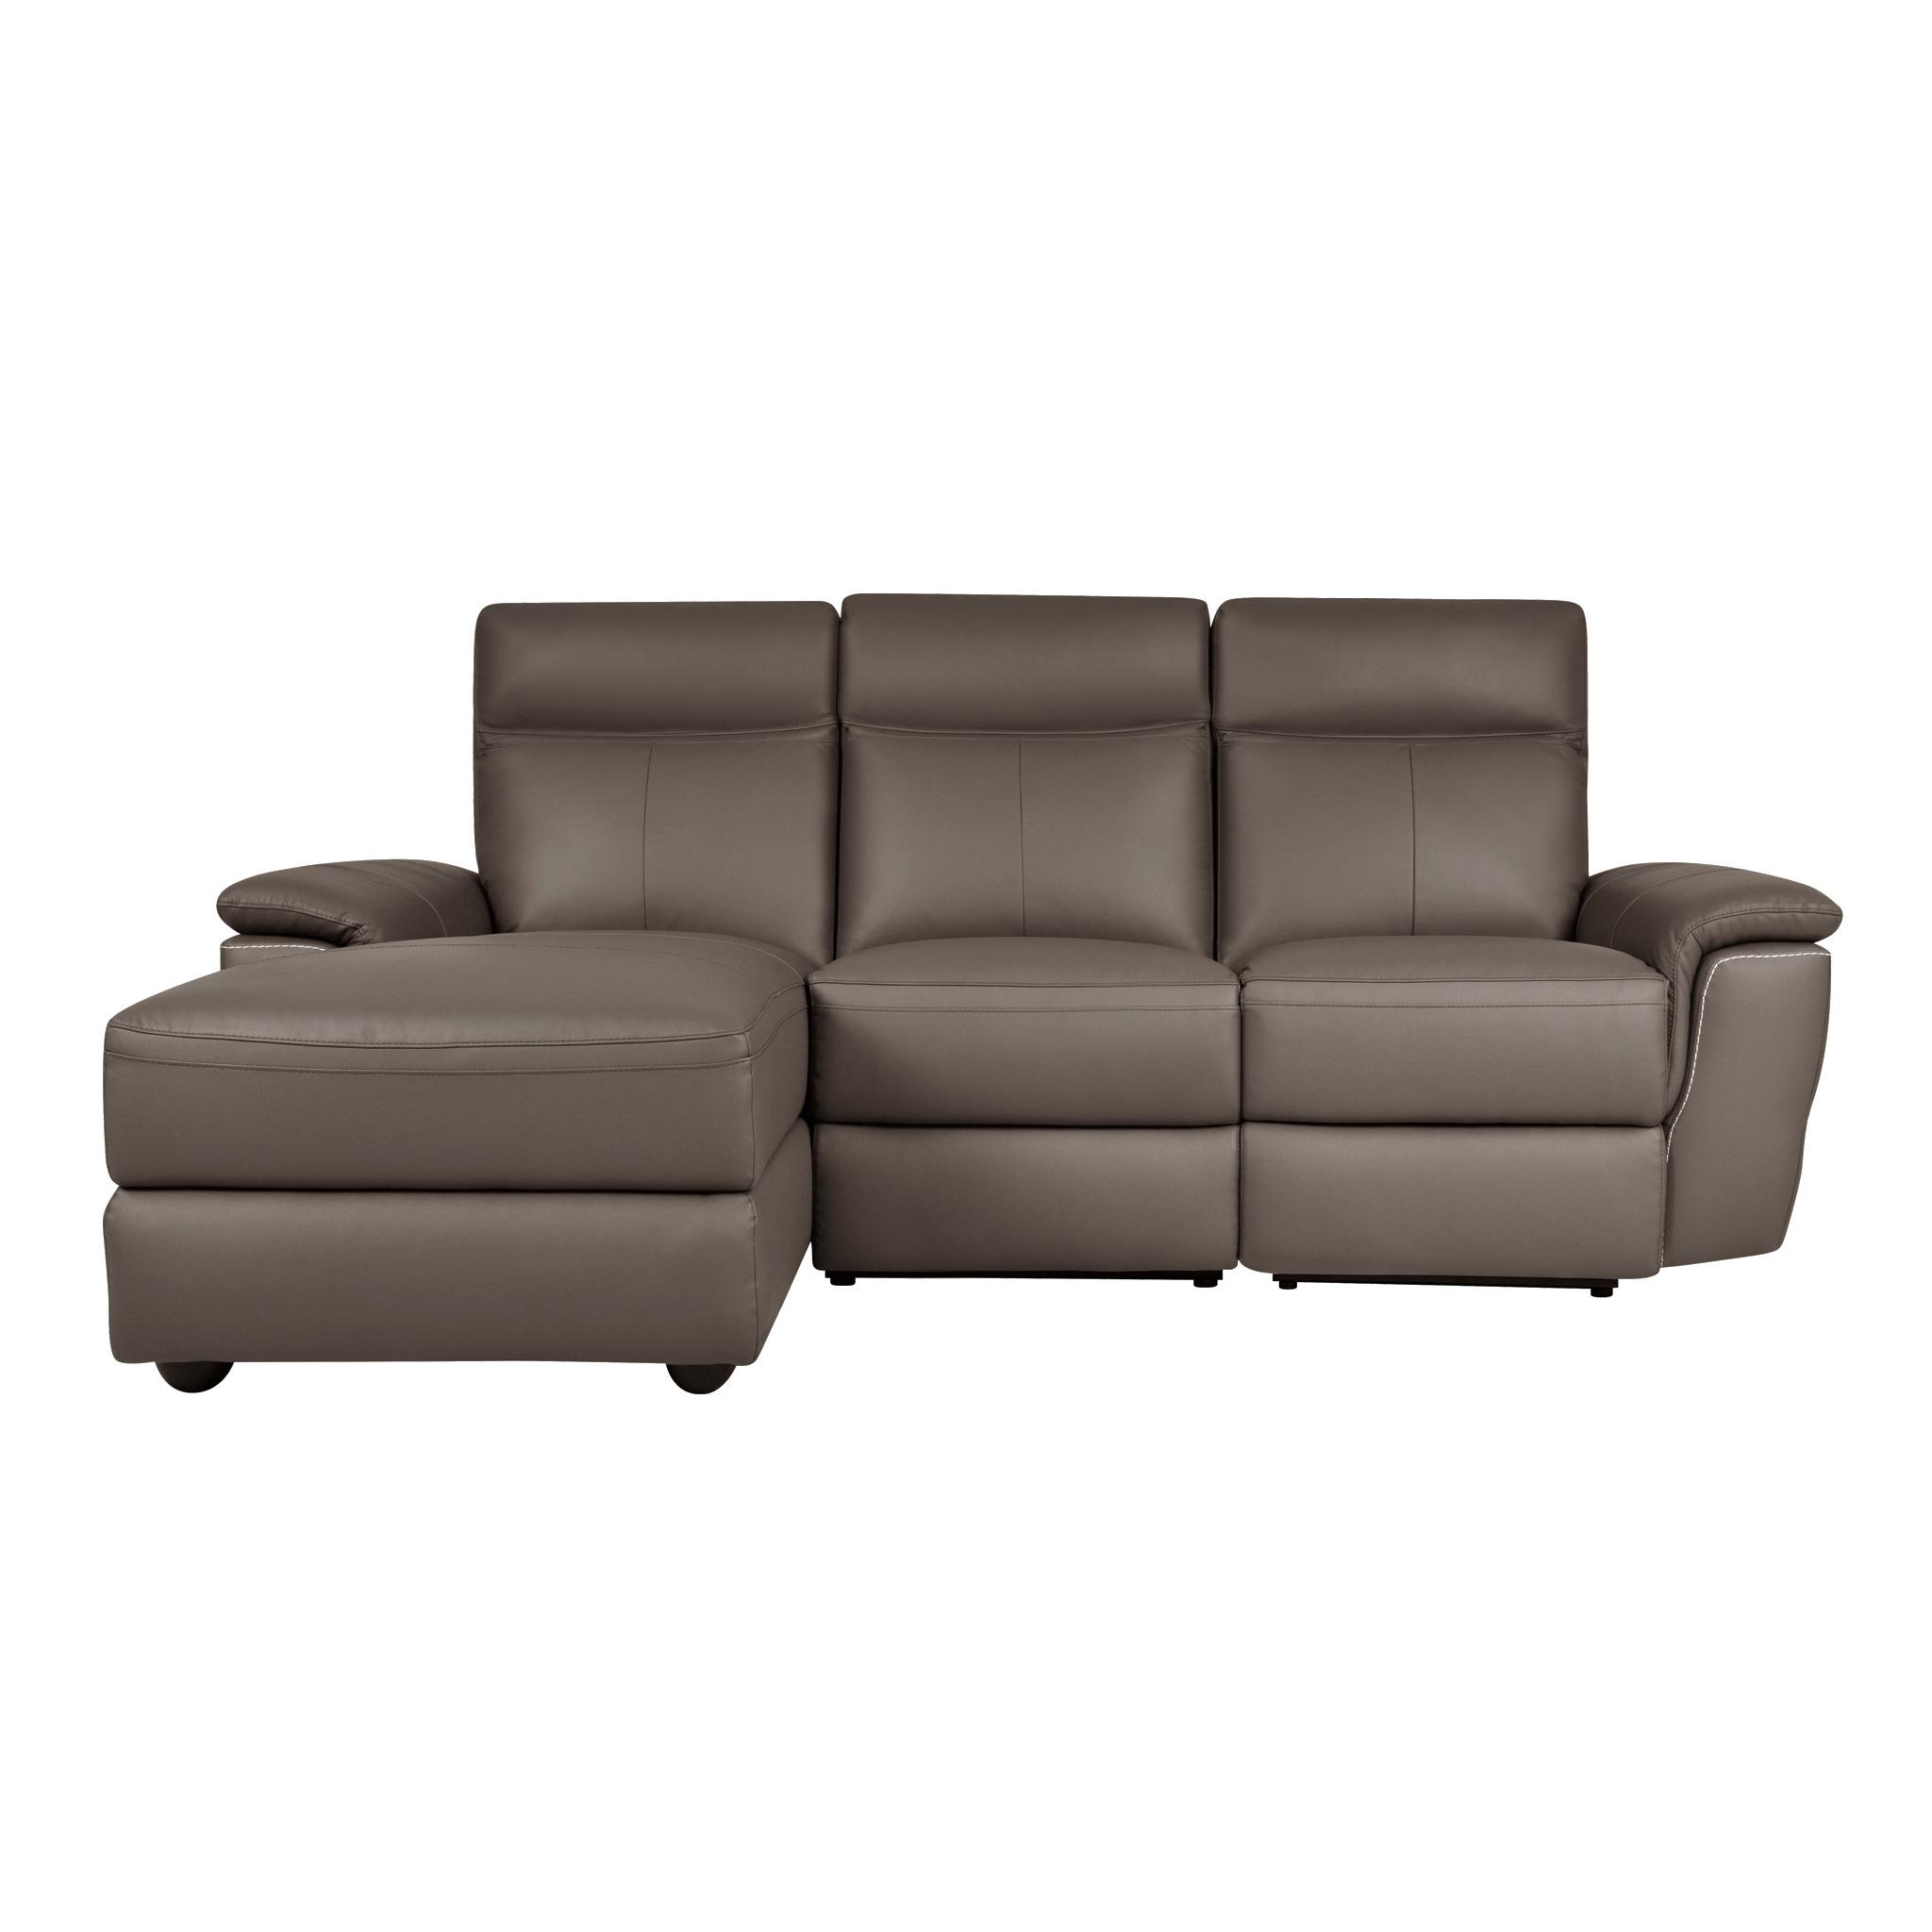 Contemporary Power Reclining Sectional 8308*35LRC Olympia 8308*35LRC in Brown Top grain leather